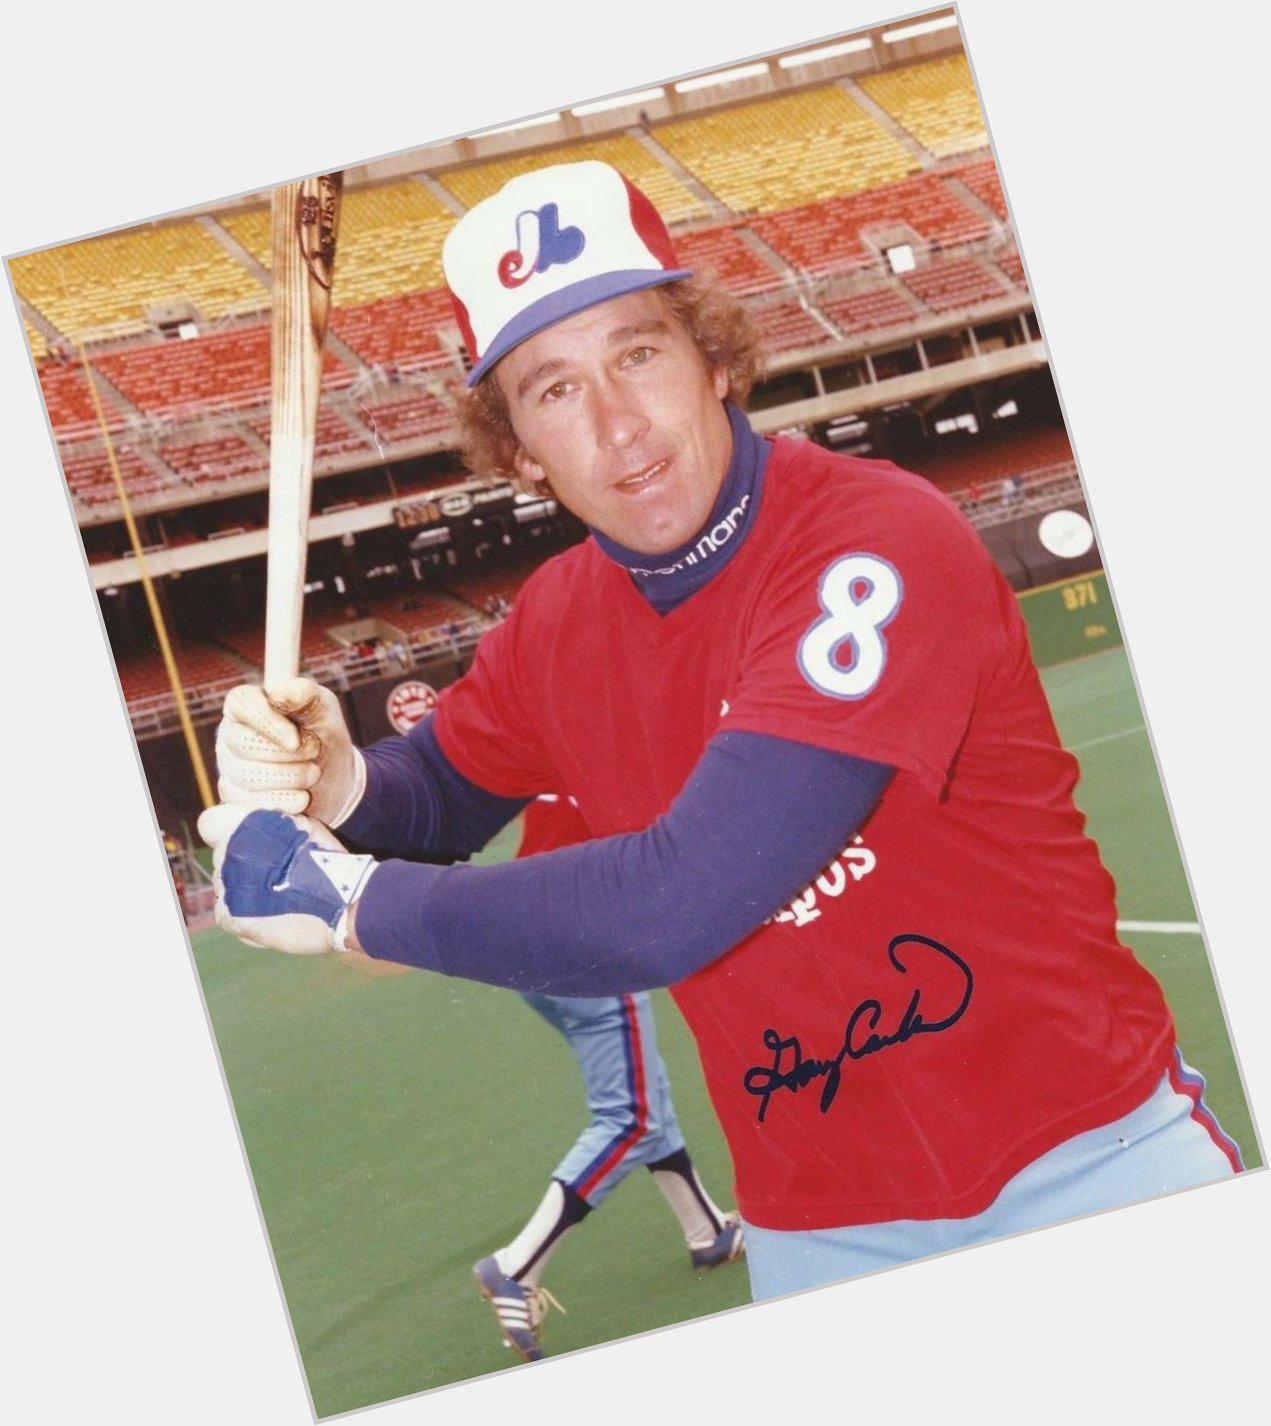 Remembering the kid, Gary Carter.
Today would have been his 63rd birthday...
Happy birthday Kid!! 